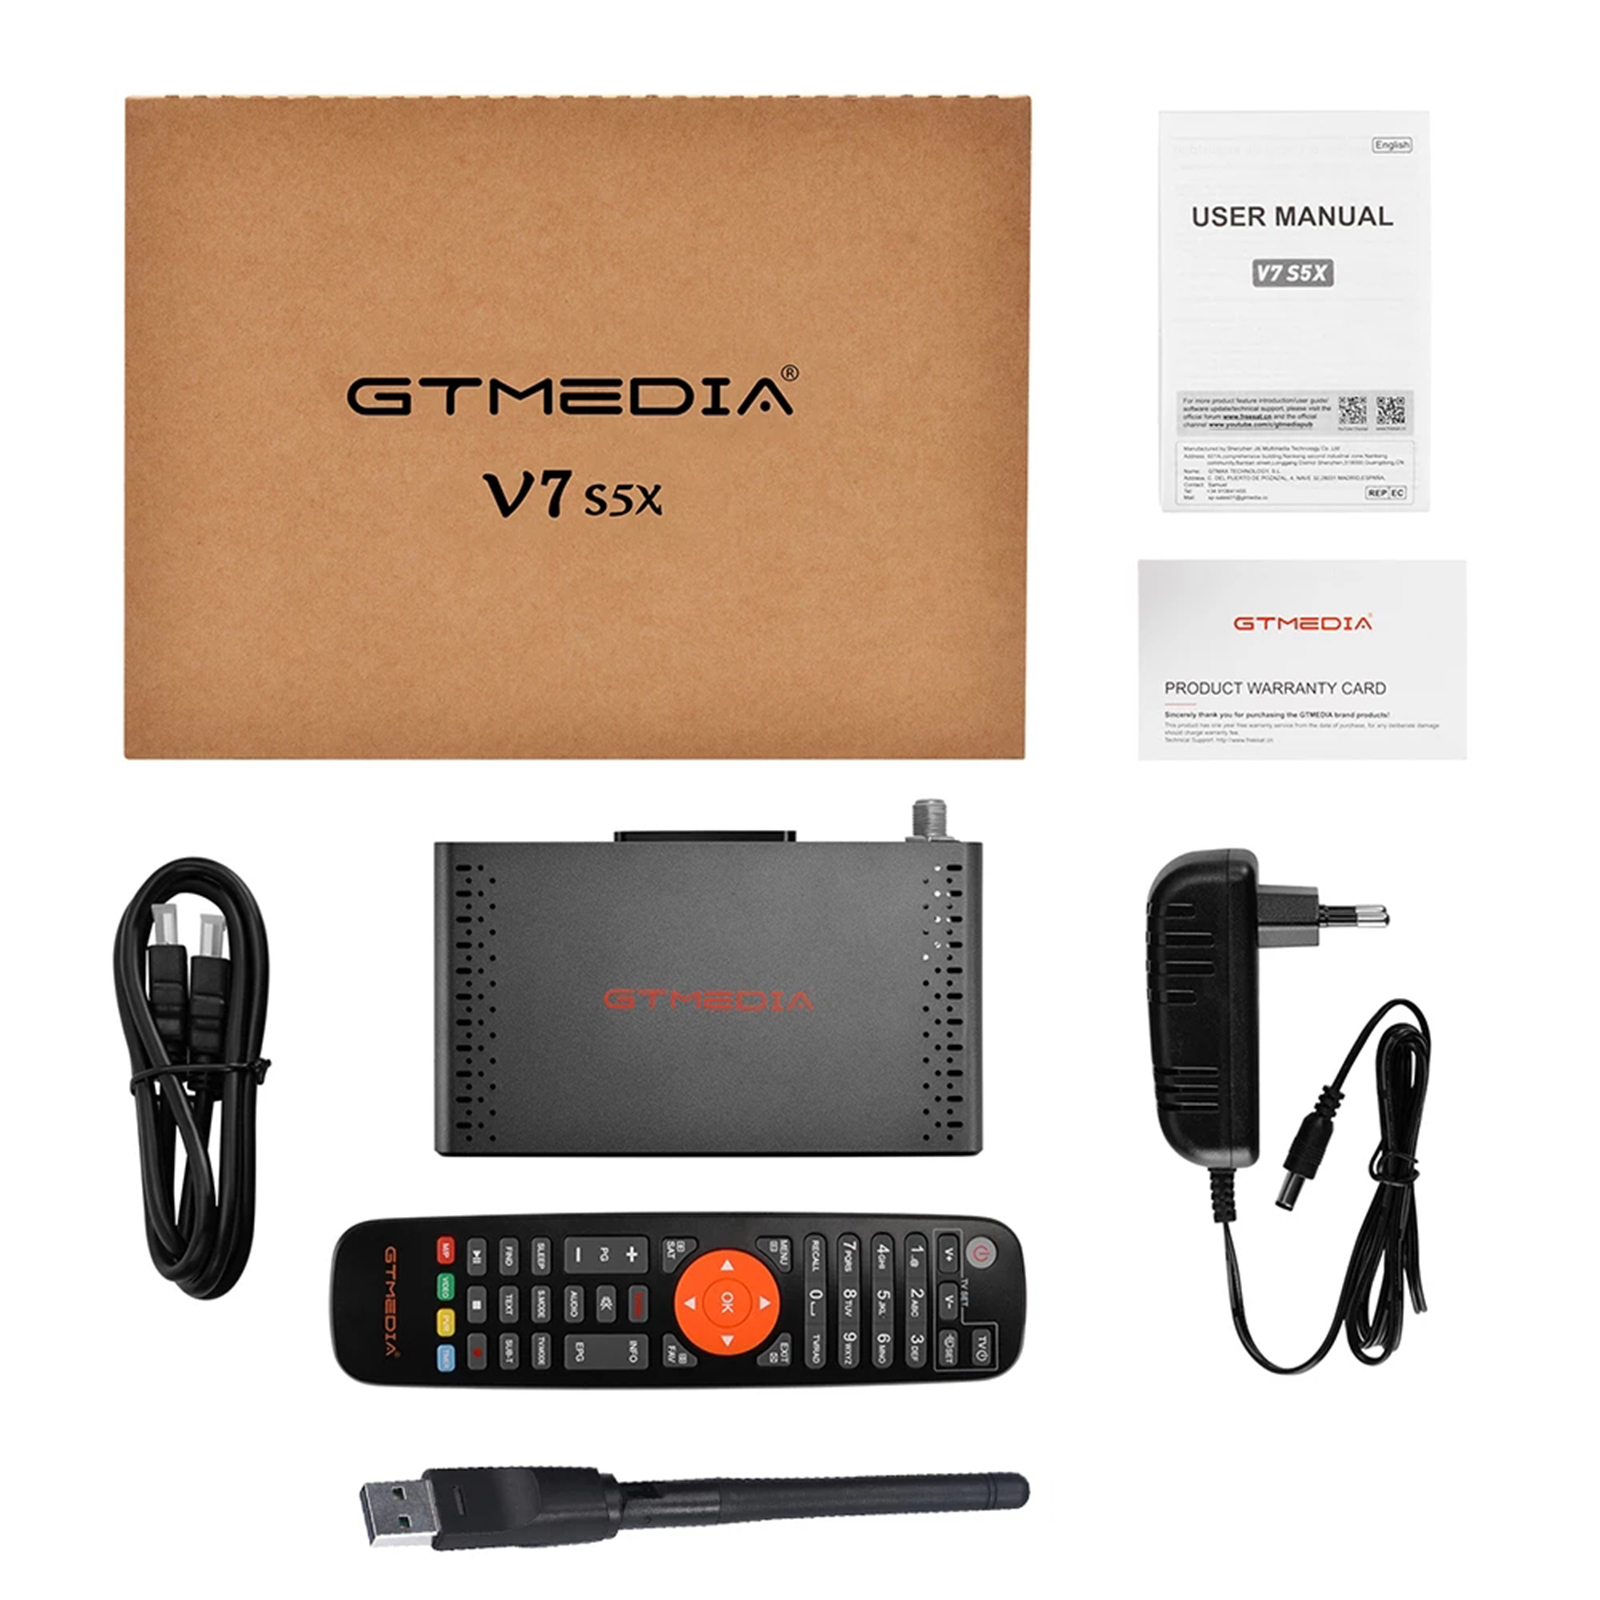 GTMEDIA-V7-S5X-DVB-S-DVB-S2-S2X-H265-1080P-HD-Satellite-TV-Receiver-Decoder-Set-Top-Box-with-USB-WIF-1930174-10